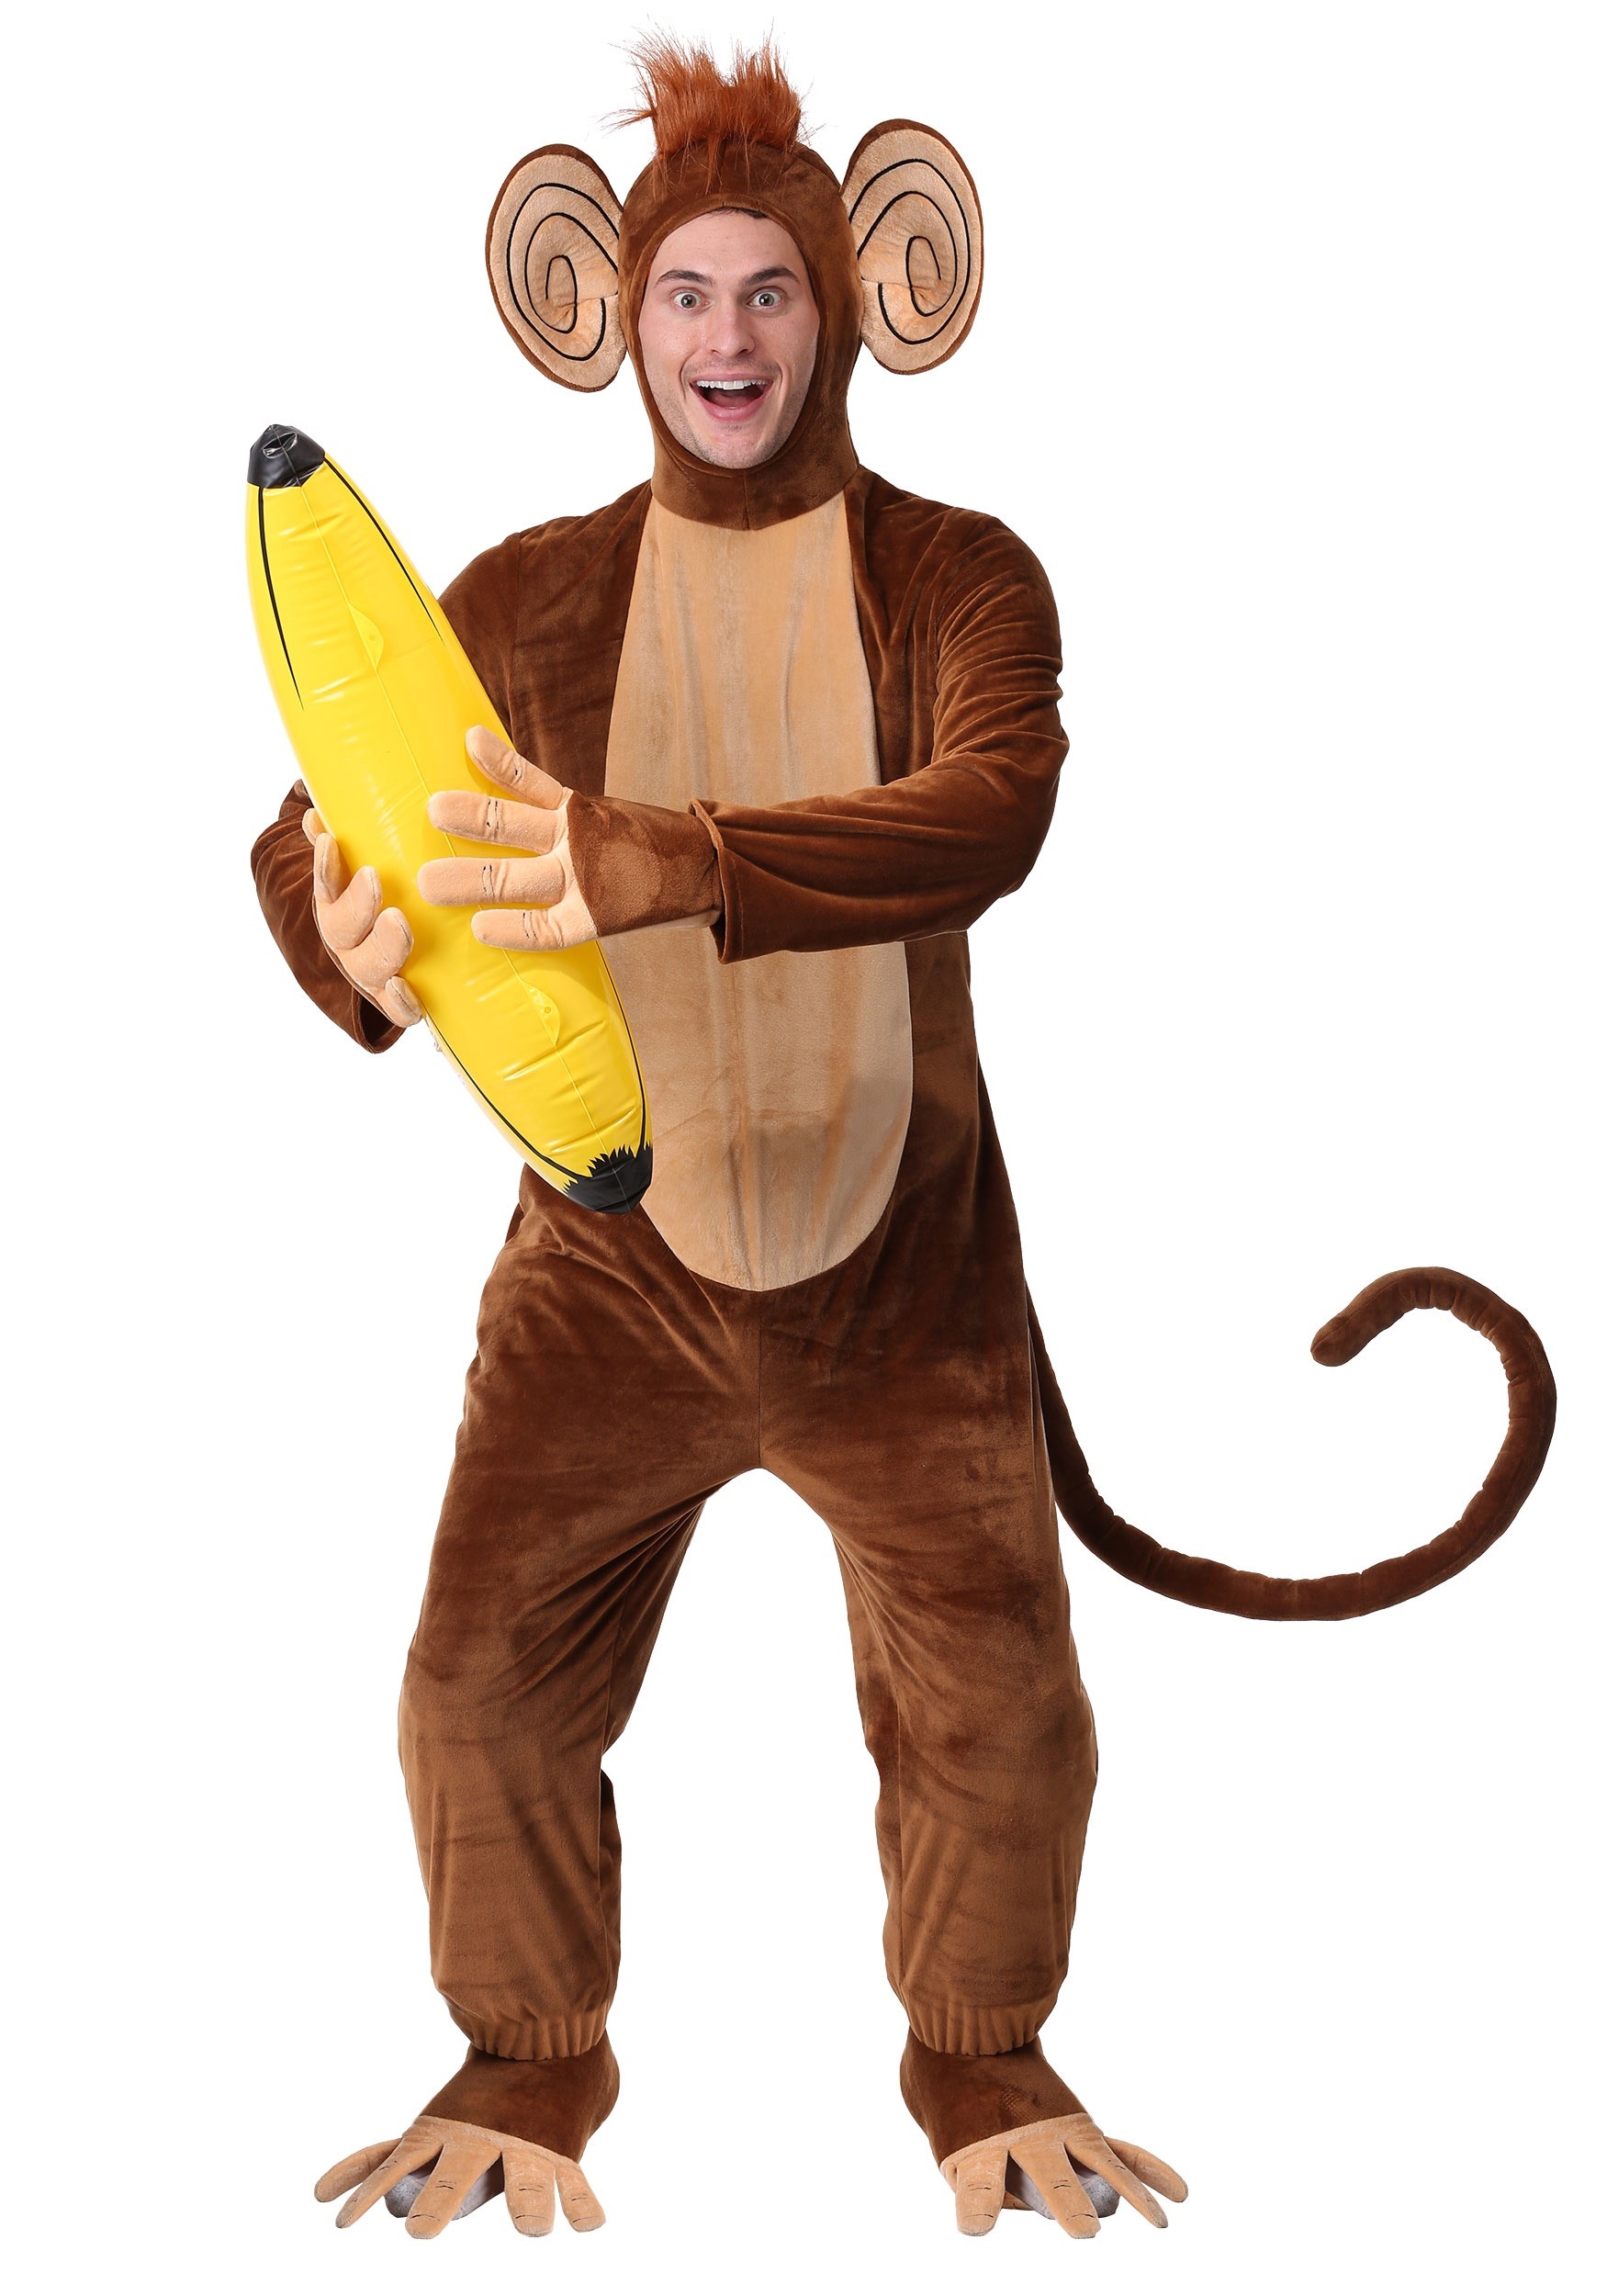 Monkey Costume For Adults